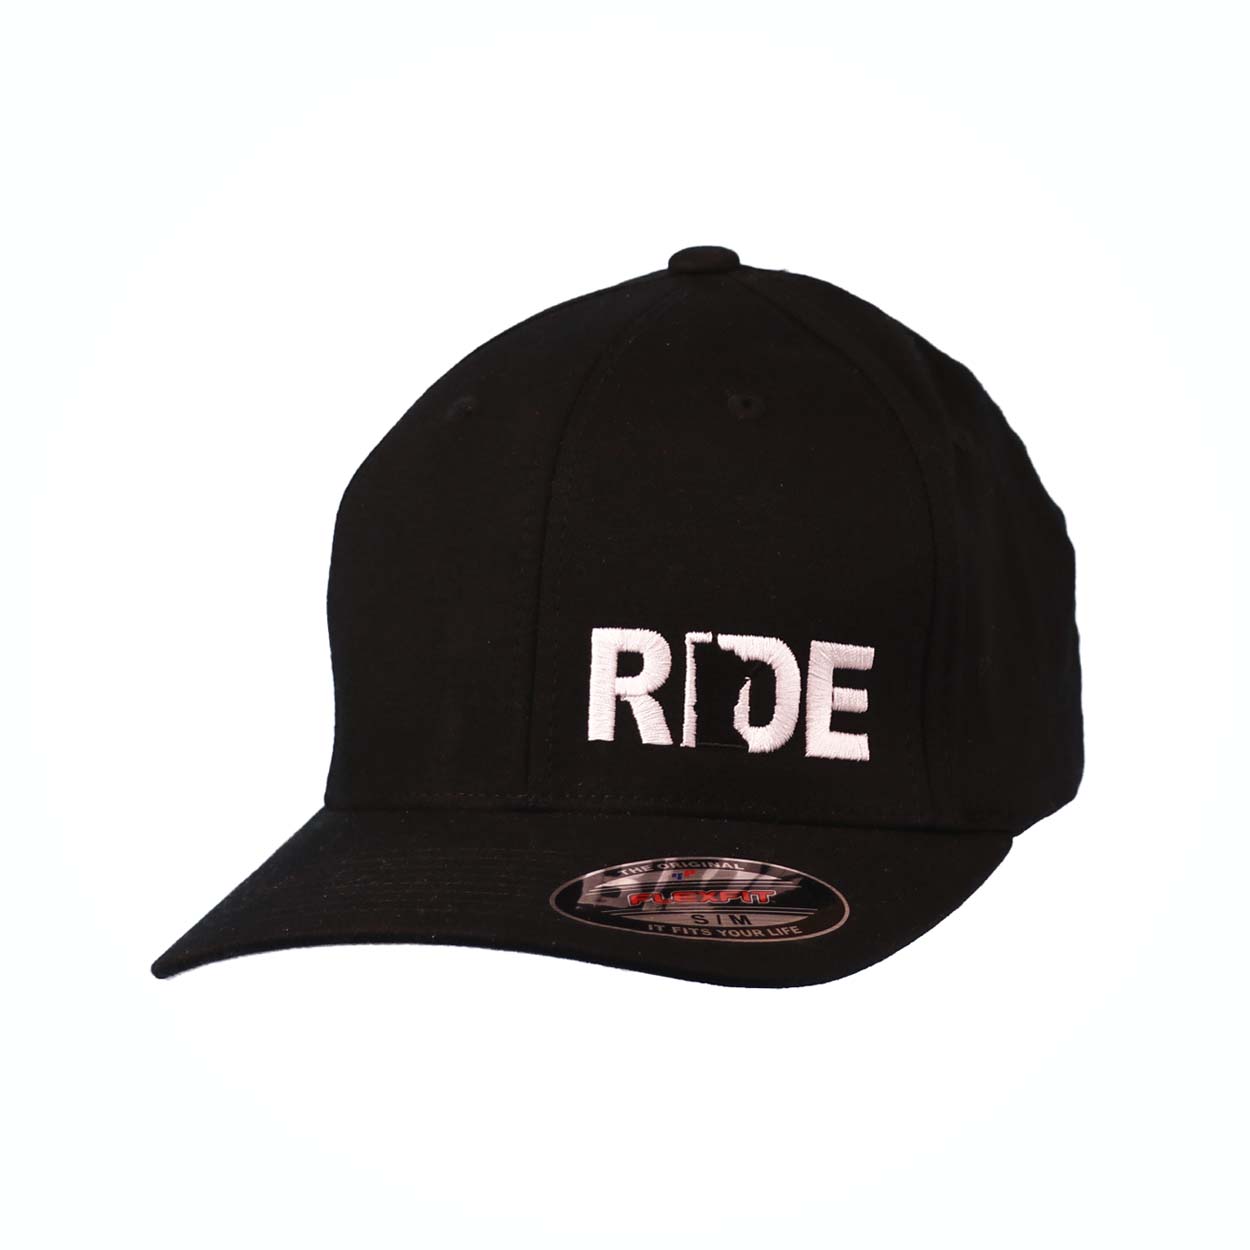 Ride Minnesota Classic Pro Night Out Embroidered Flex Fit Trucker Hat Black